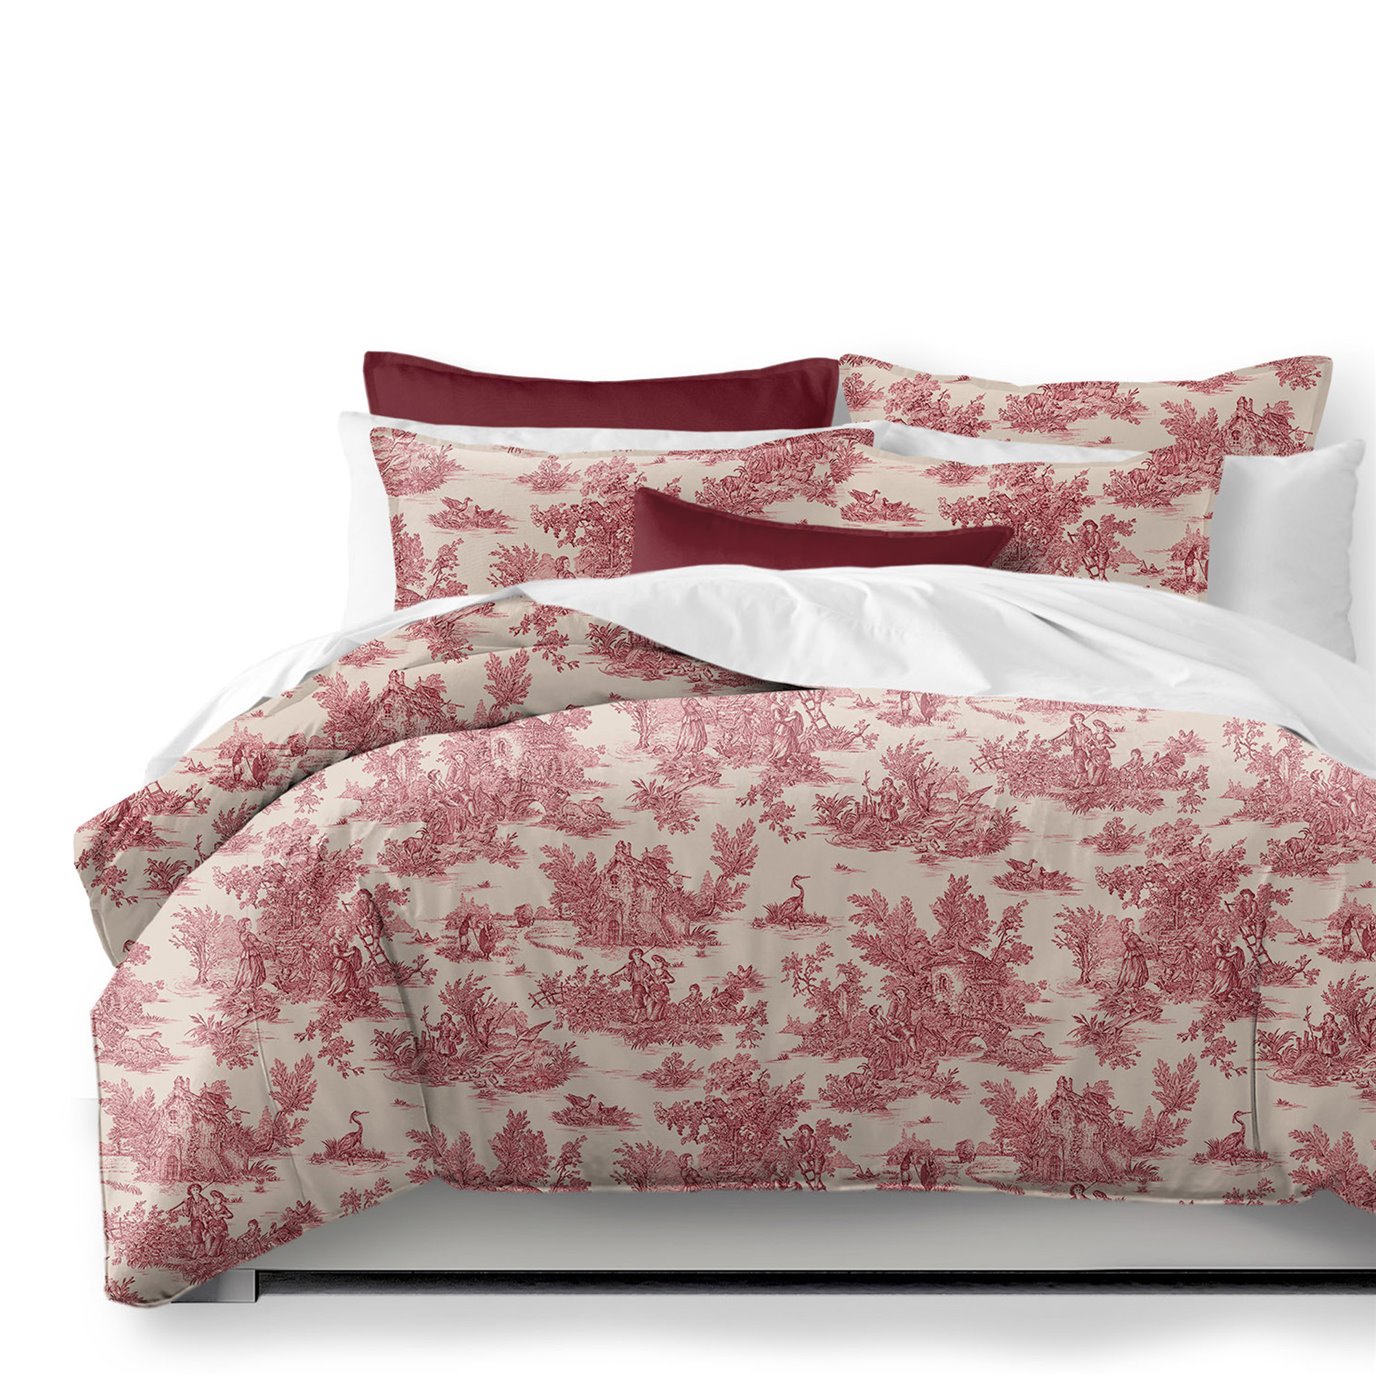 Bouclair Red Coverlet and Pillow Sham(s) Set - Size Full